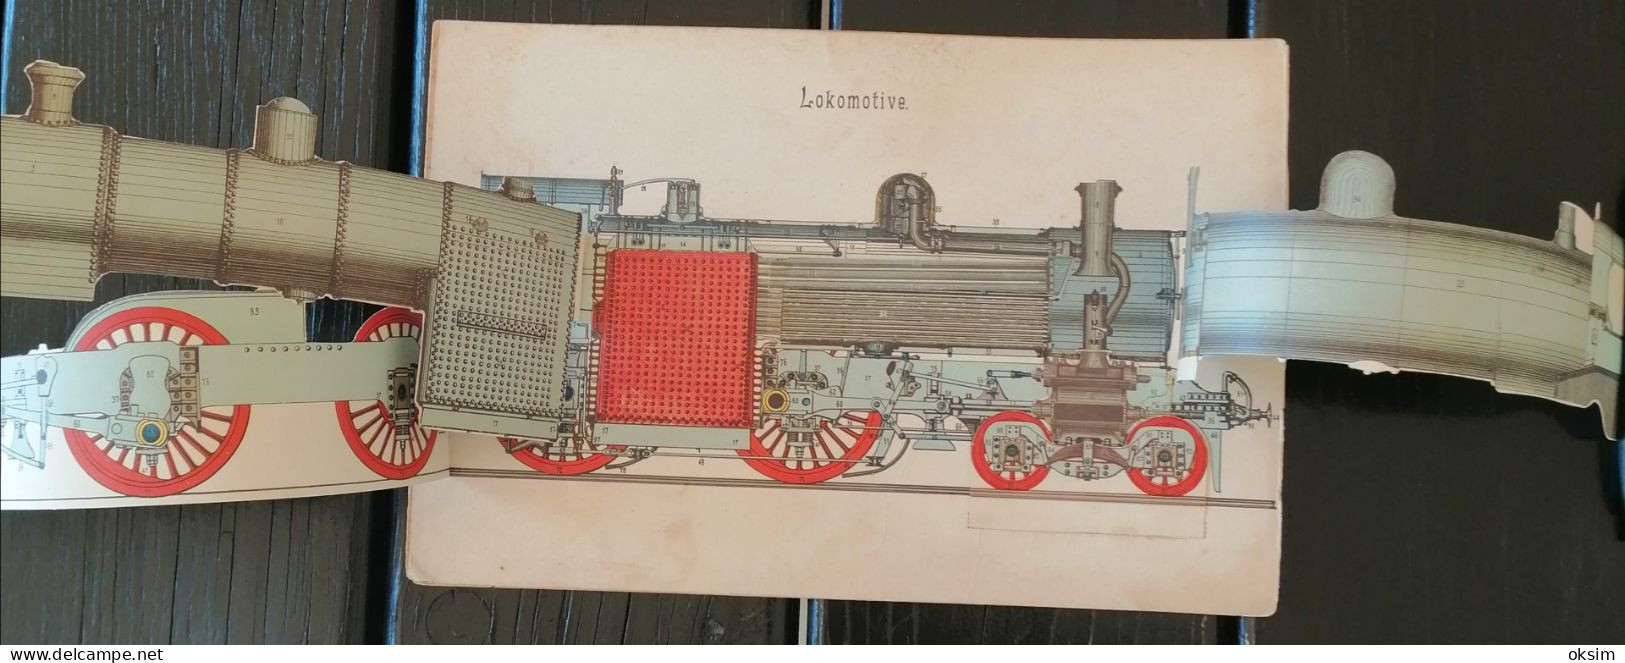 Drawings Of Machinery In Colour, Consisting Of Several Layers That Can Be Unfolded To Show The Interior Of The Machines - Tools